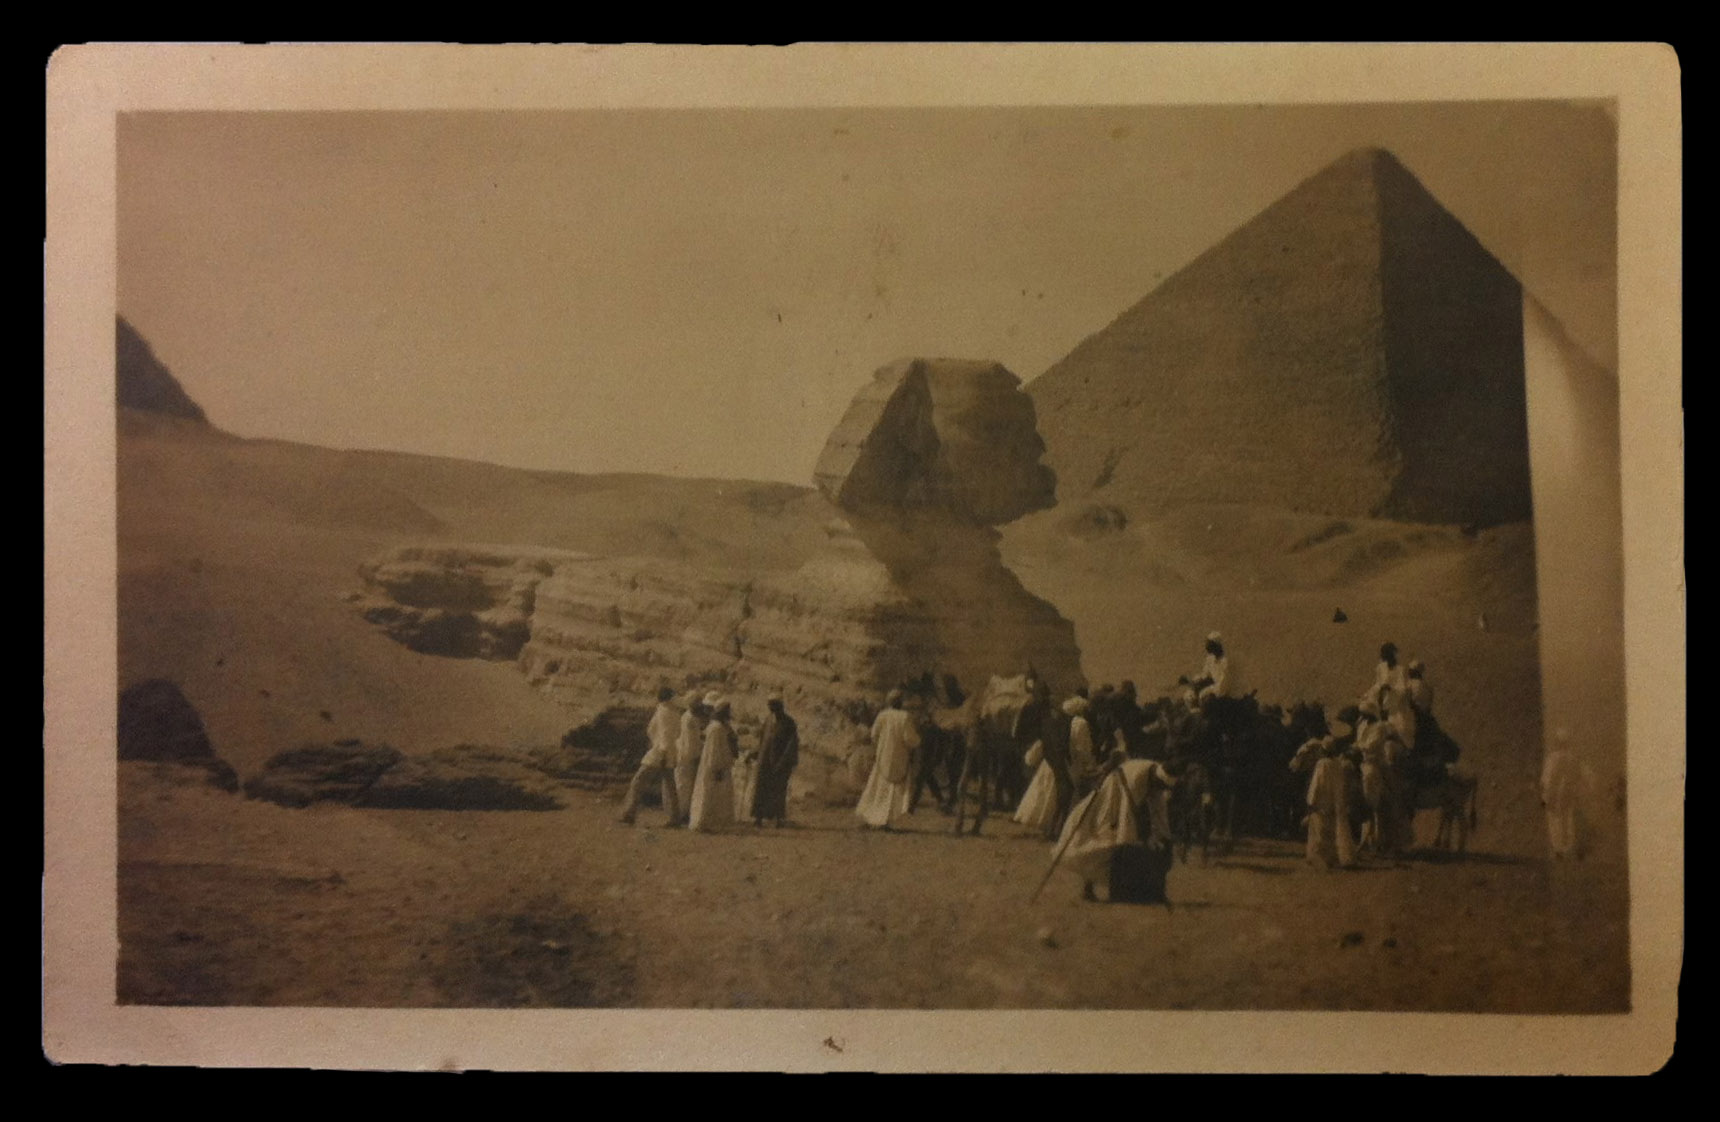 Tourist party in front of the Sphinx, Egypt